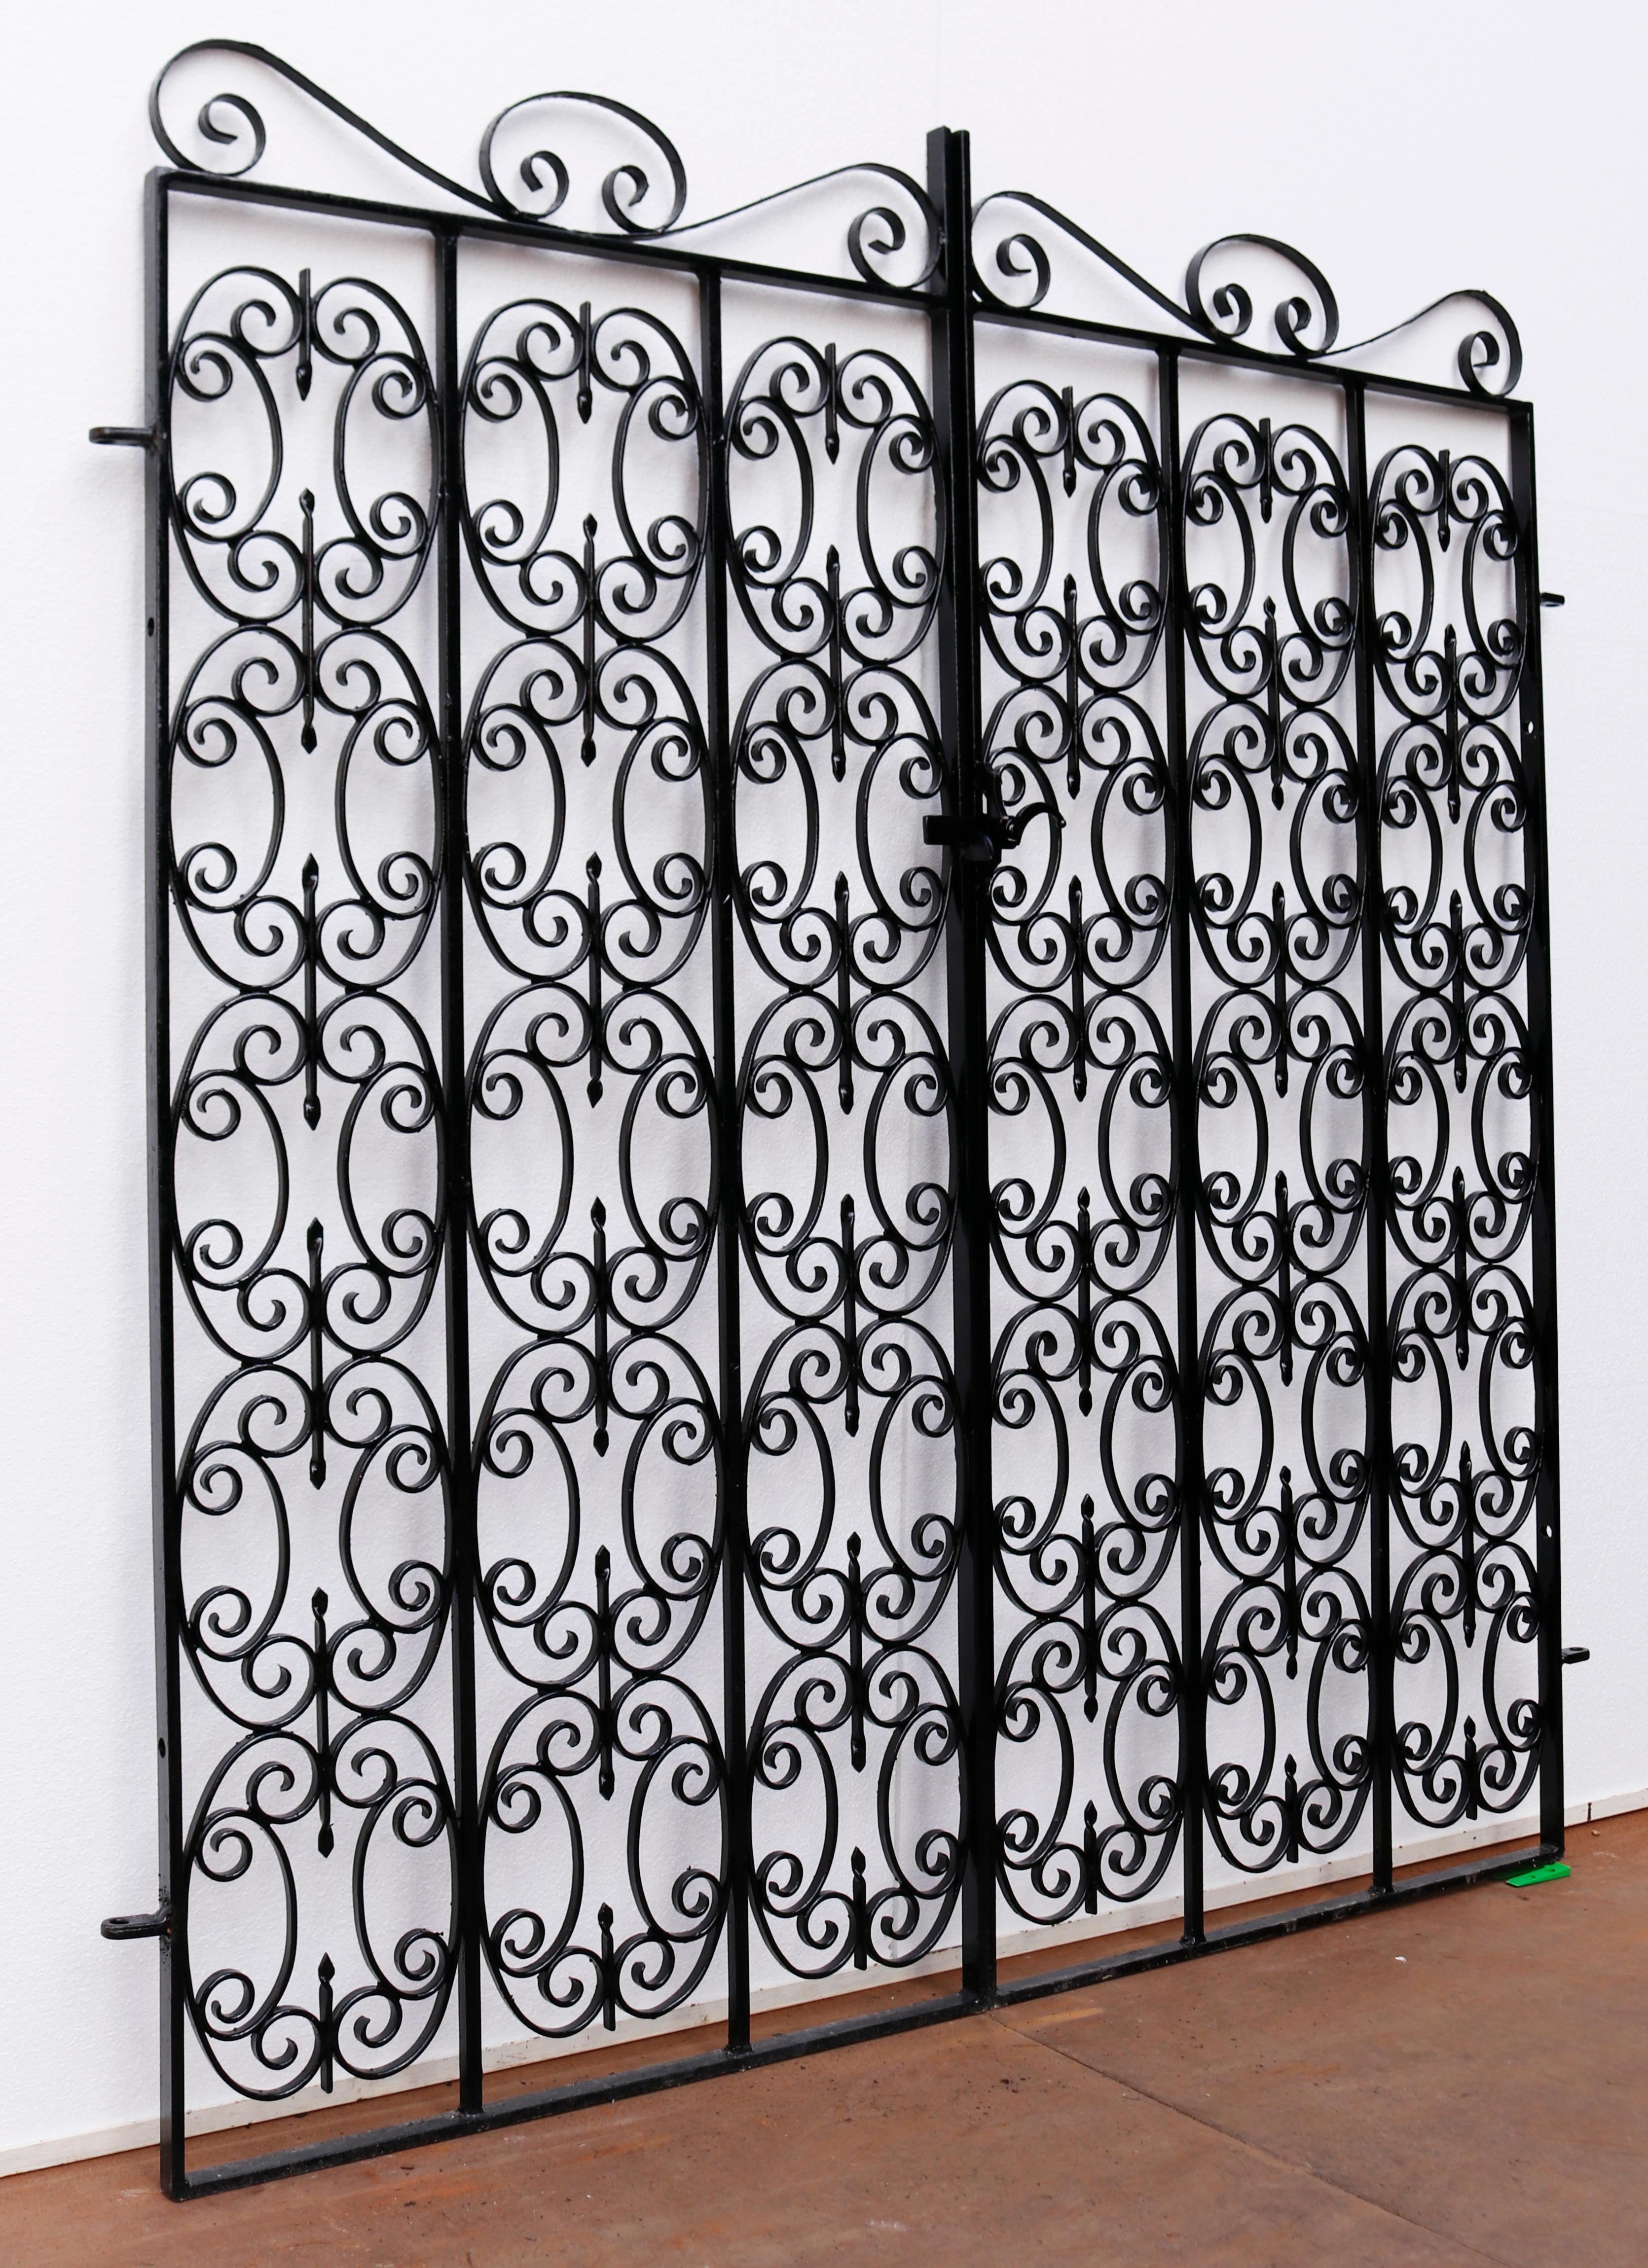 Pair of reclaimed wrought iron garden gates. A set of wrought iron garden gates with a repeated scrollwork design.

Additional dimensions 

For an opening of approximately 161 cm.